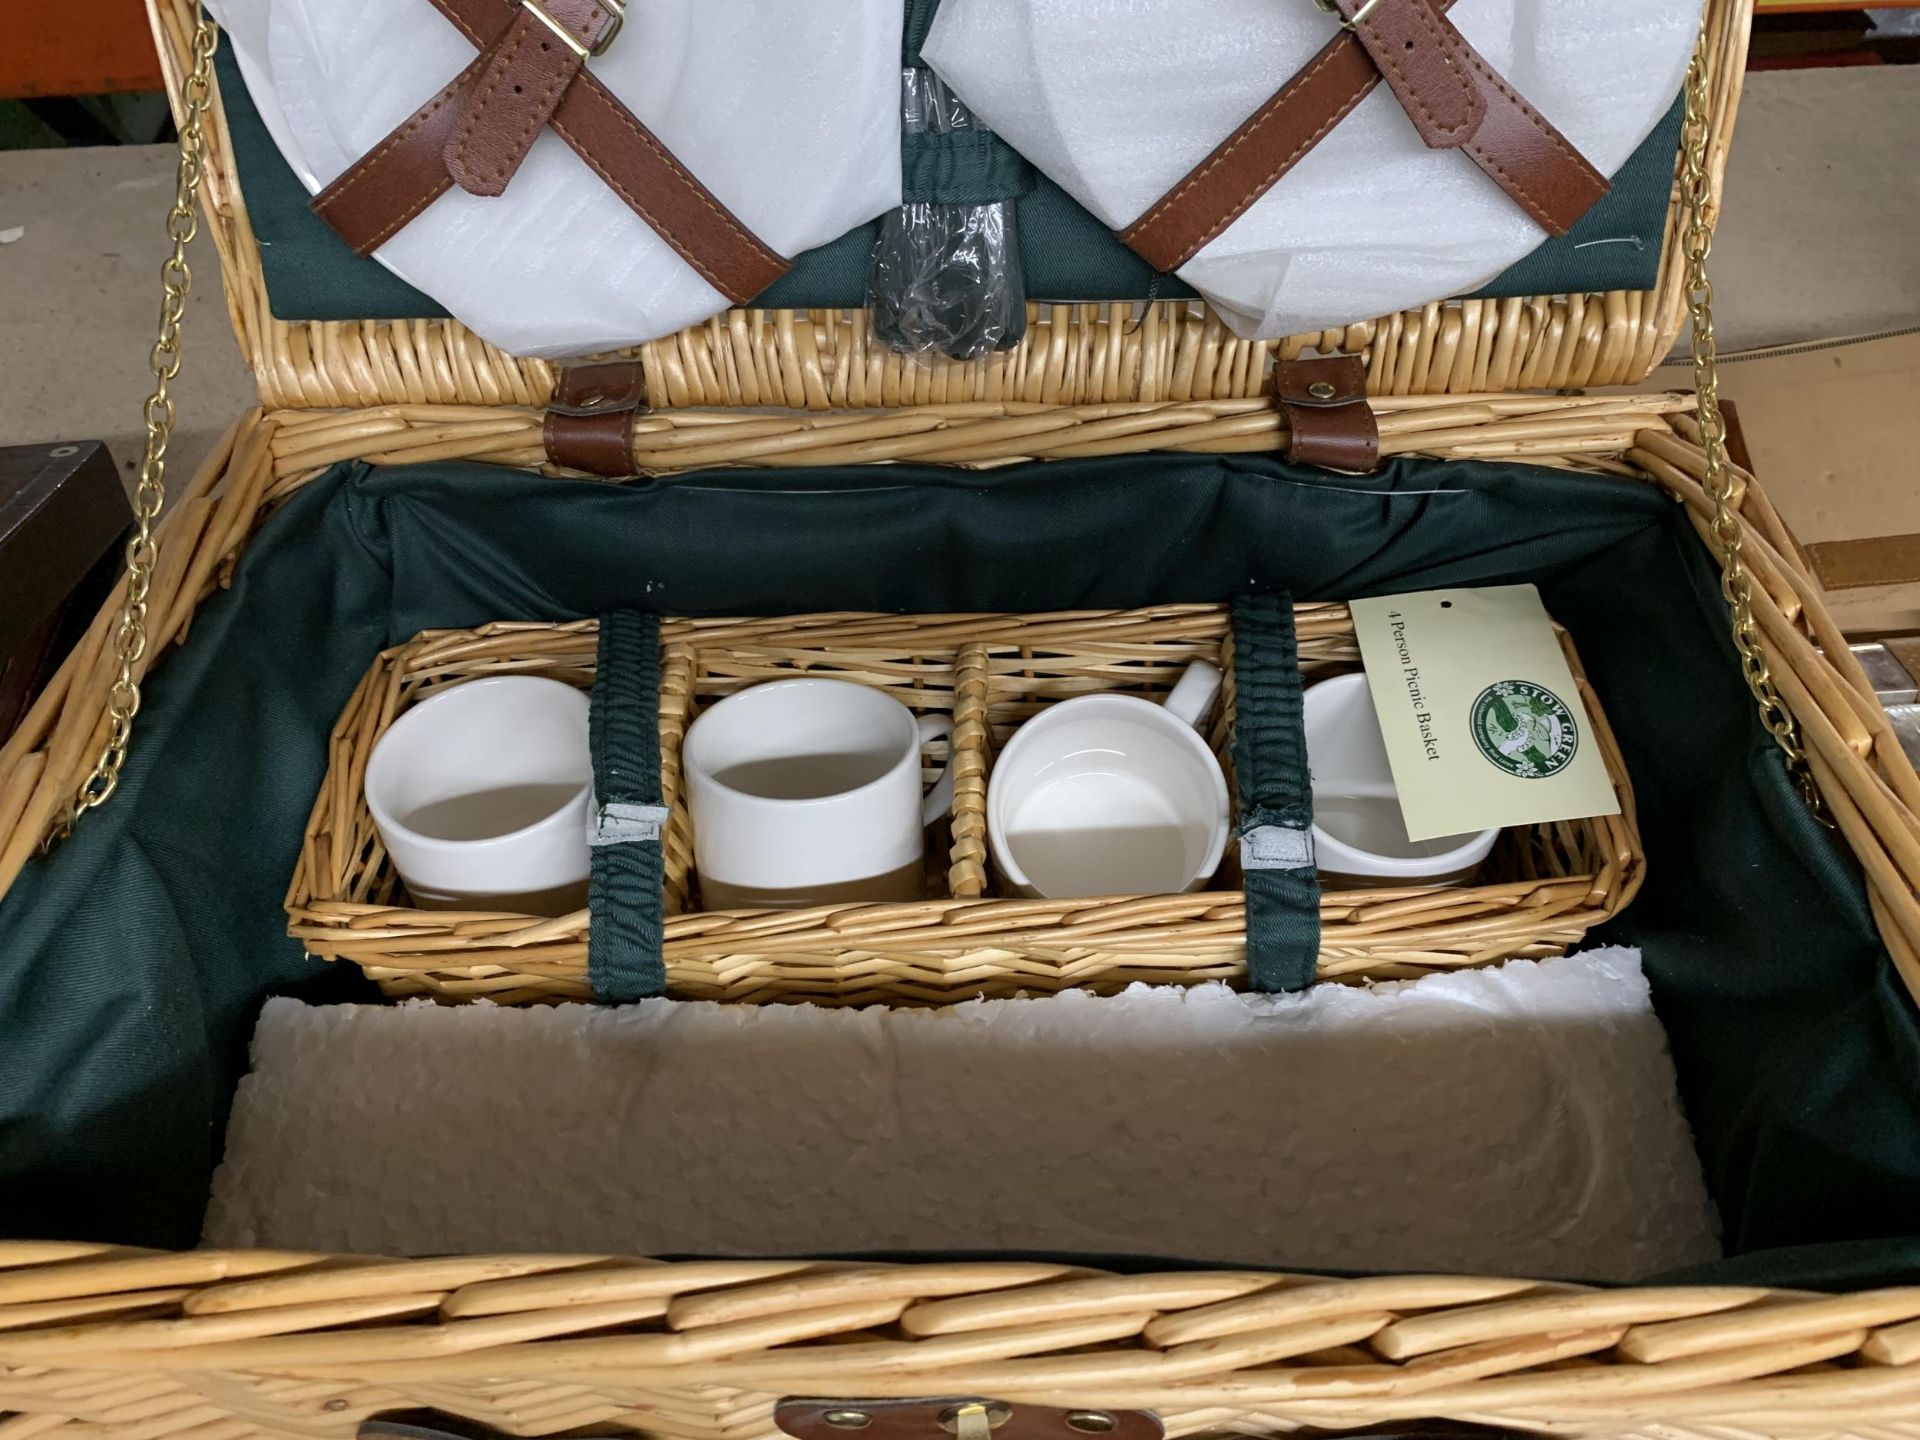 A STOW GREEN WICKER PICNIC BASKET - Image 2 of 3